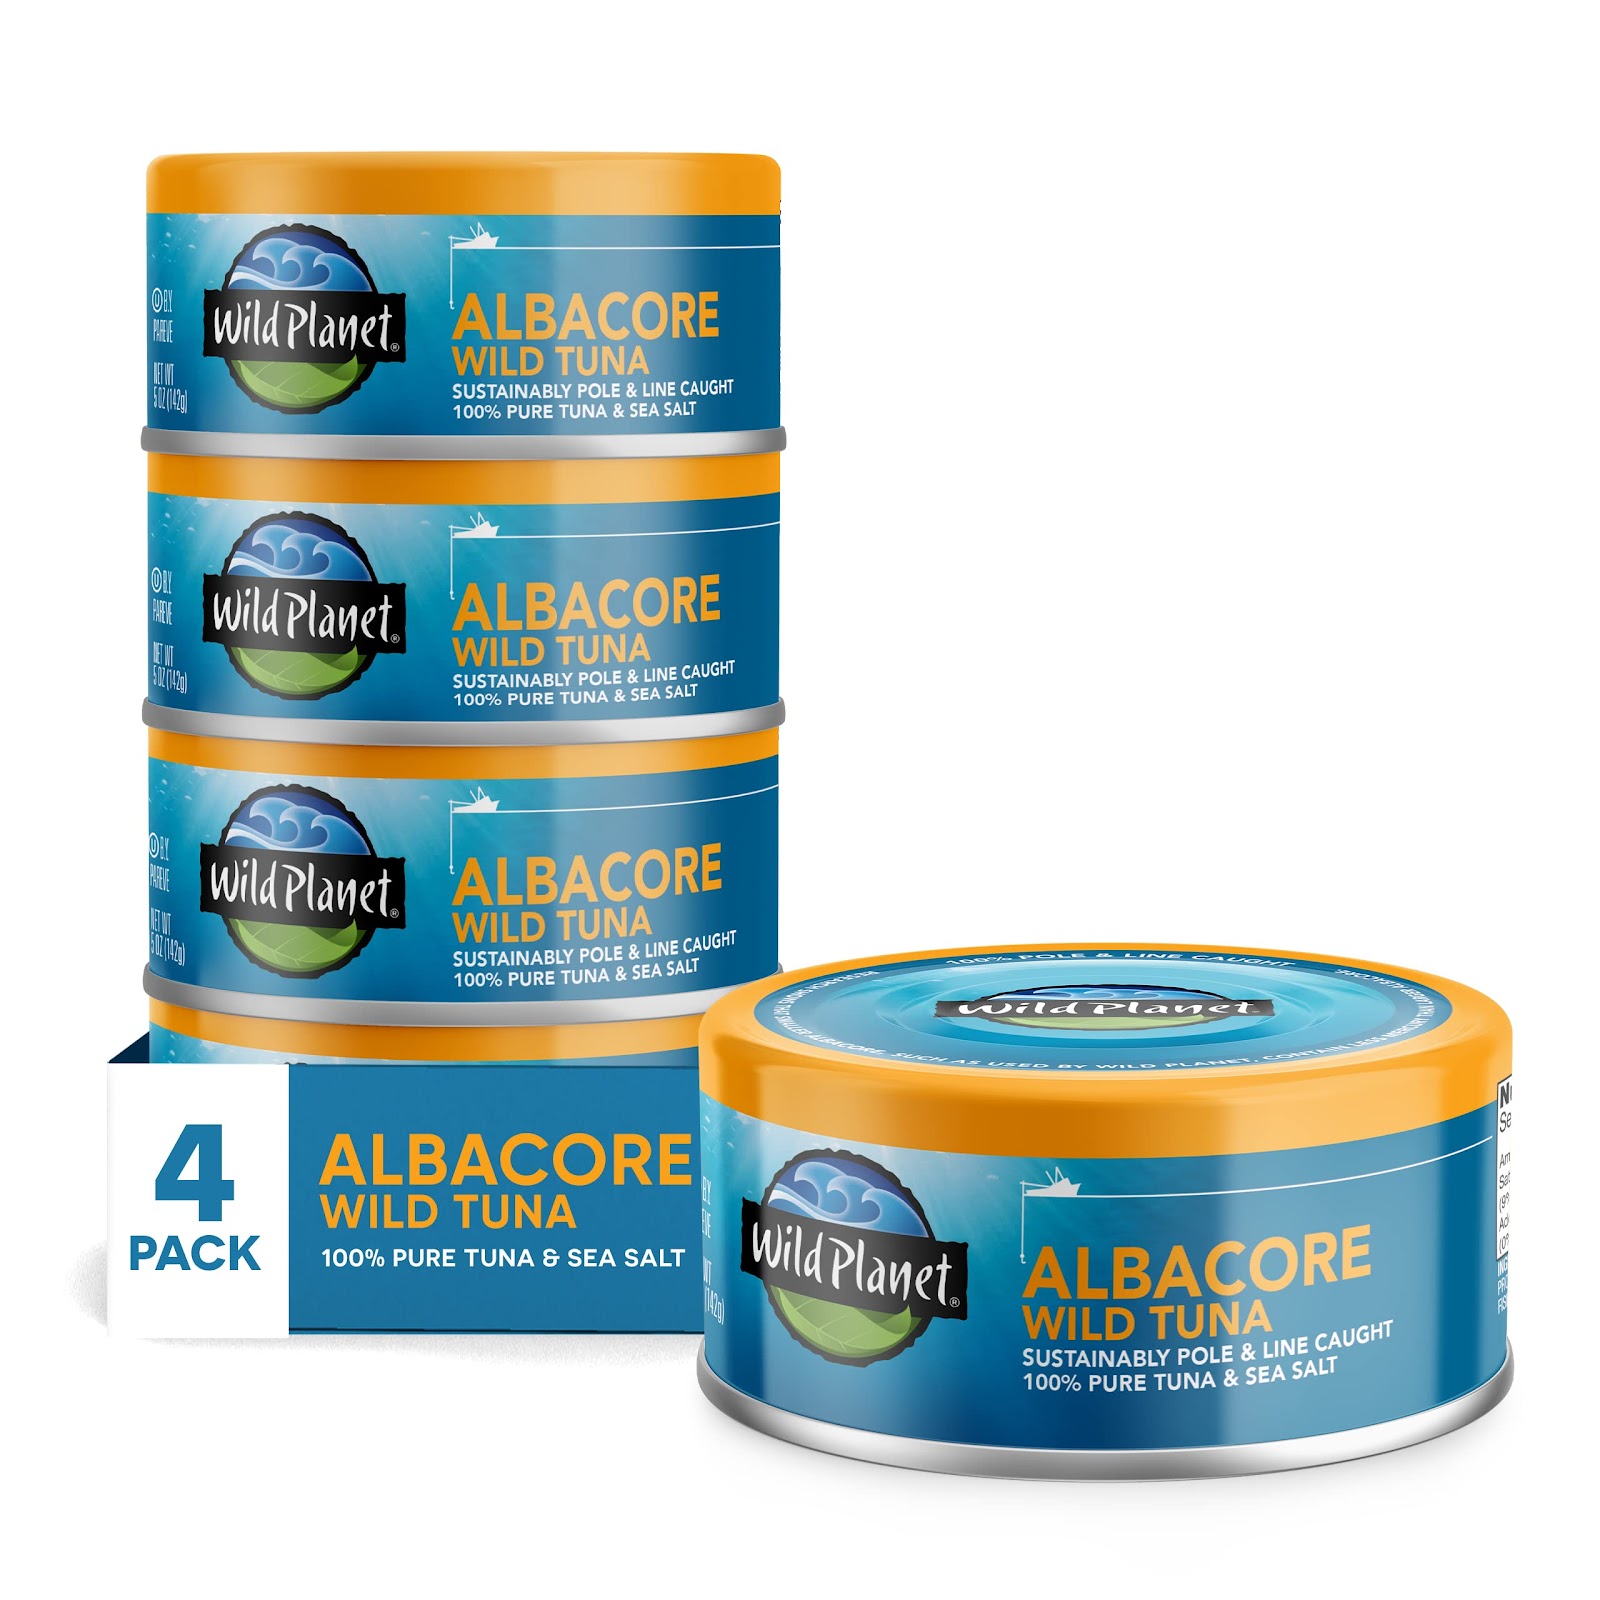 Wild Planet Albacore Wild Tuna, Sea Salt, Canned Tuna, Pole & Line Sustainably Caught, 5 Ounce(Pack of 4) Sea Salt 5 Ounce (Pack of 4)